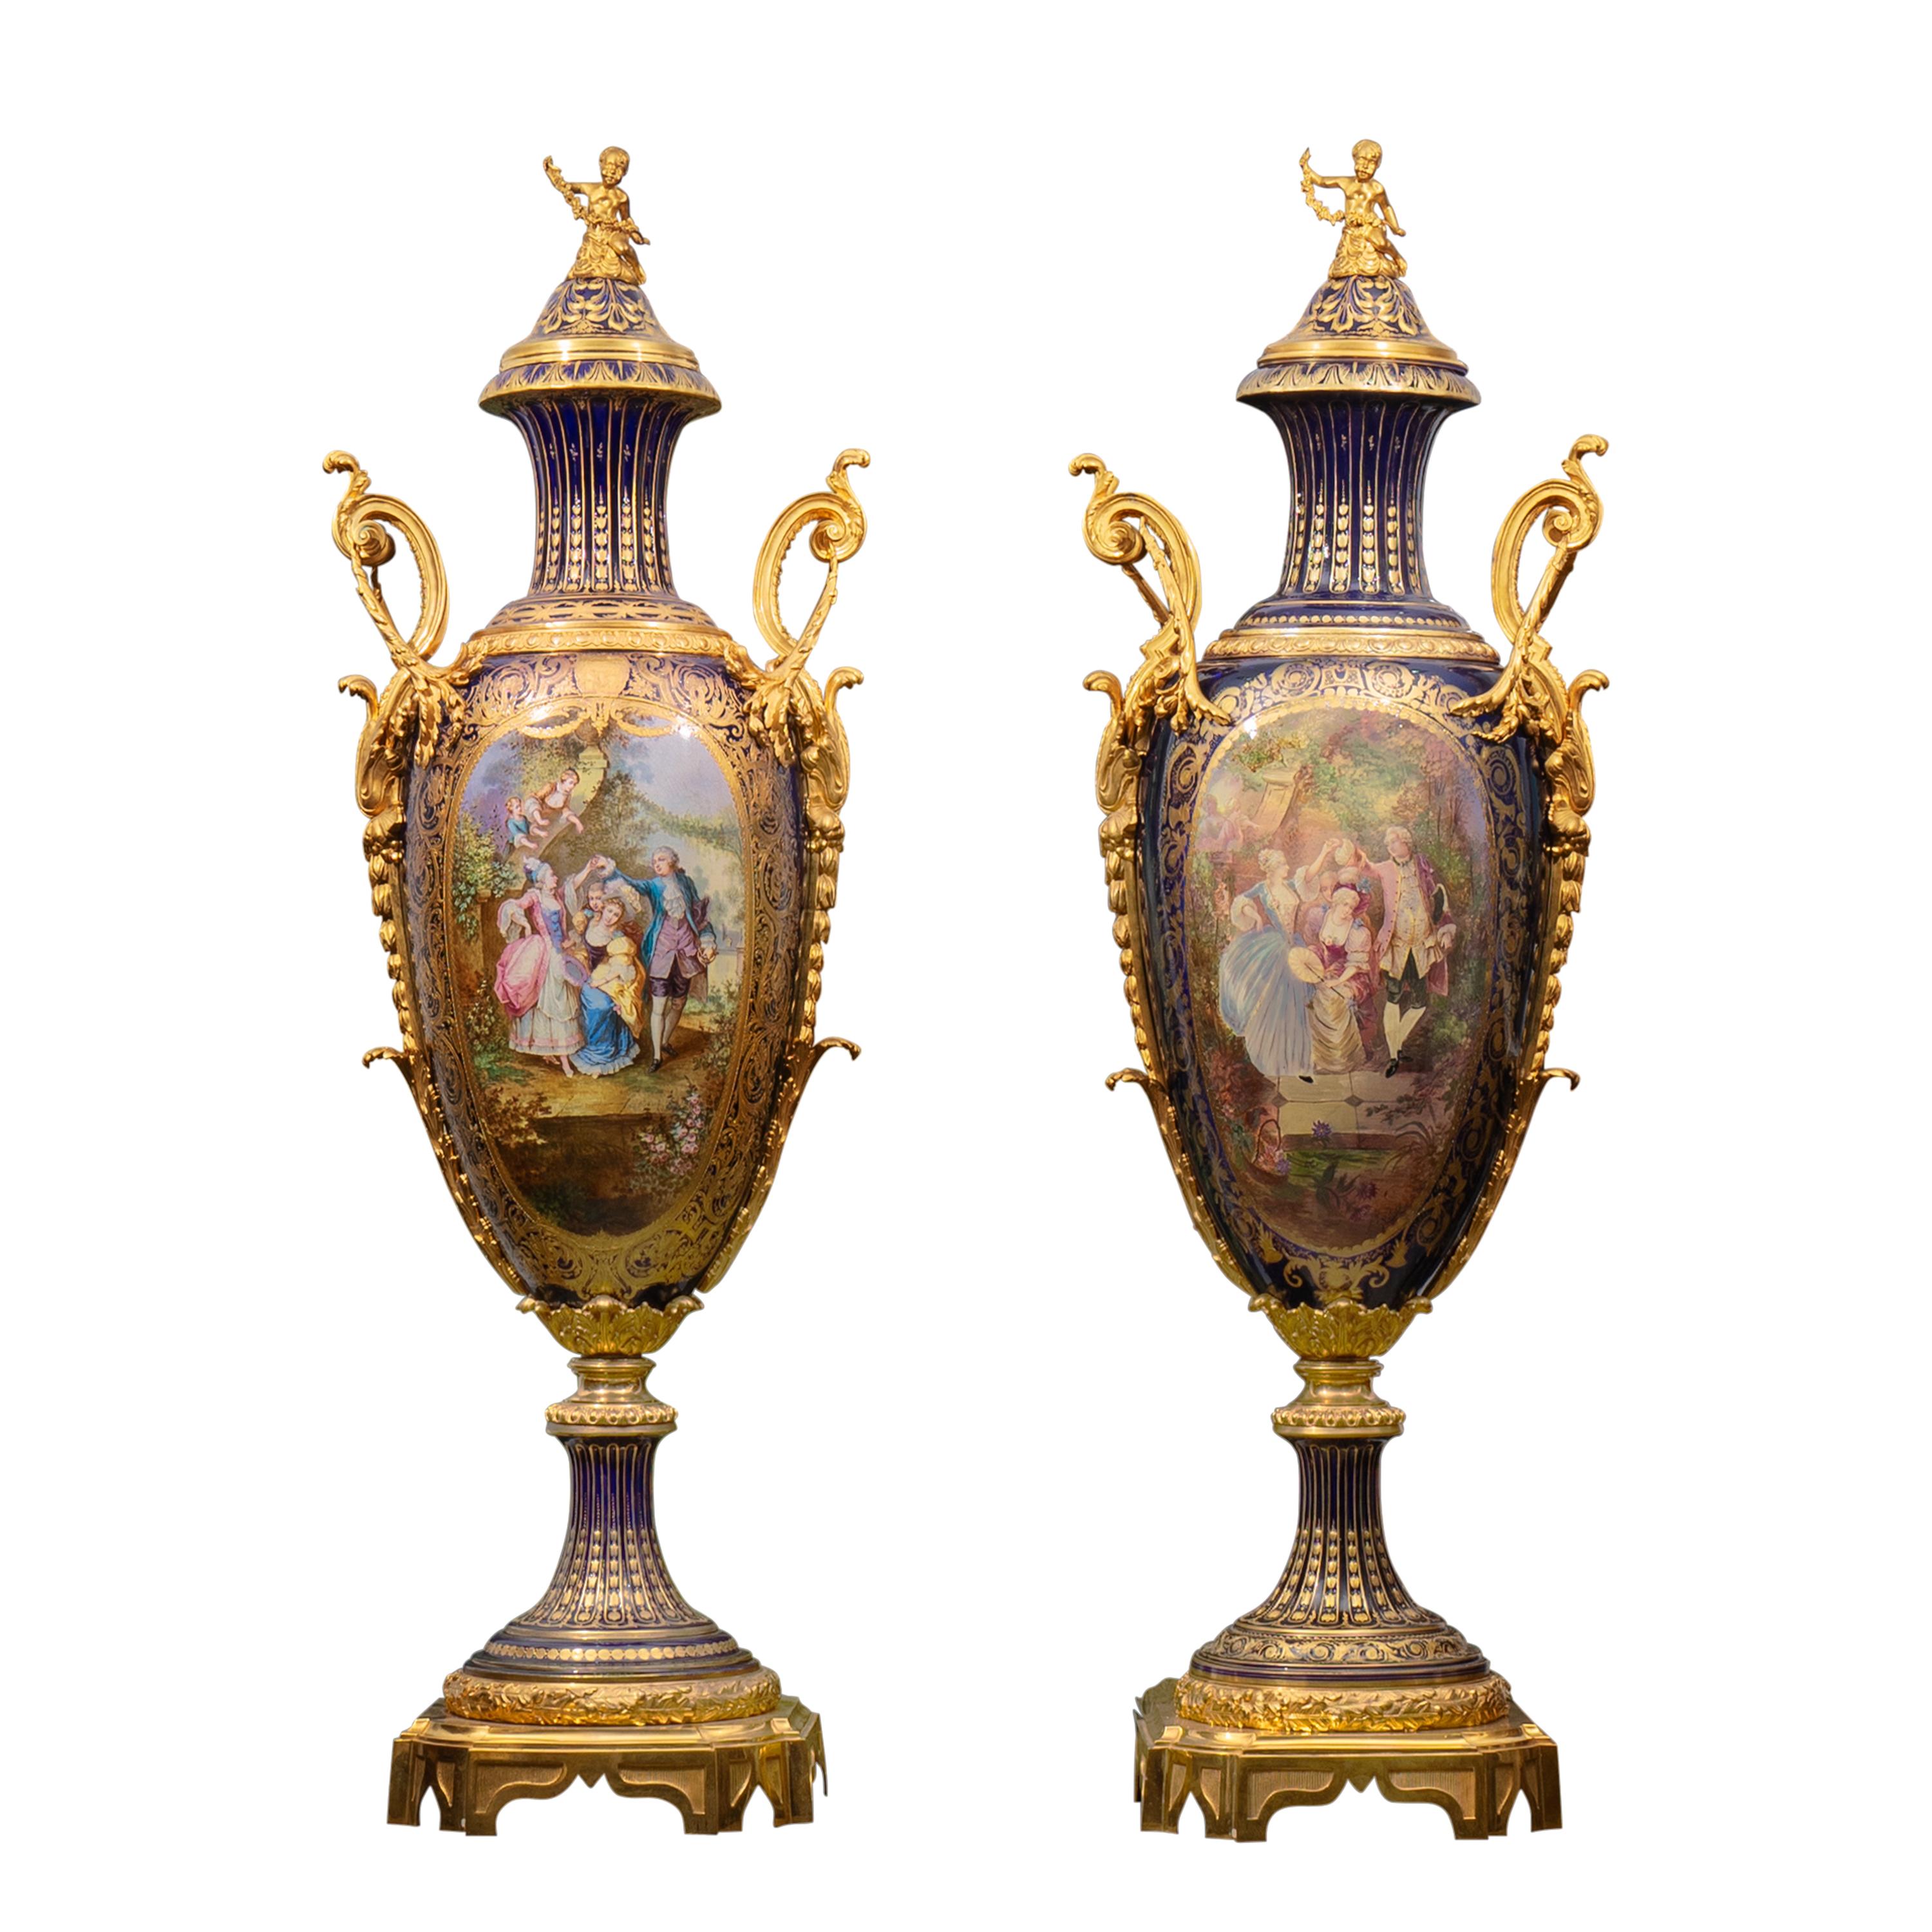 RARE PAIR OF SEVRES STYLE PALACE SIZE GILT-BRONZE MOUNTED VASES 

France, Circa 1860

These Sèvres porcelain urns are truly exceptional, standing out for their monumental size and exquisite craftsmanship, showcasing the renowned deep cobalt blue